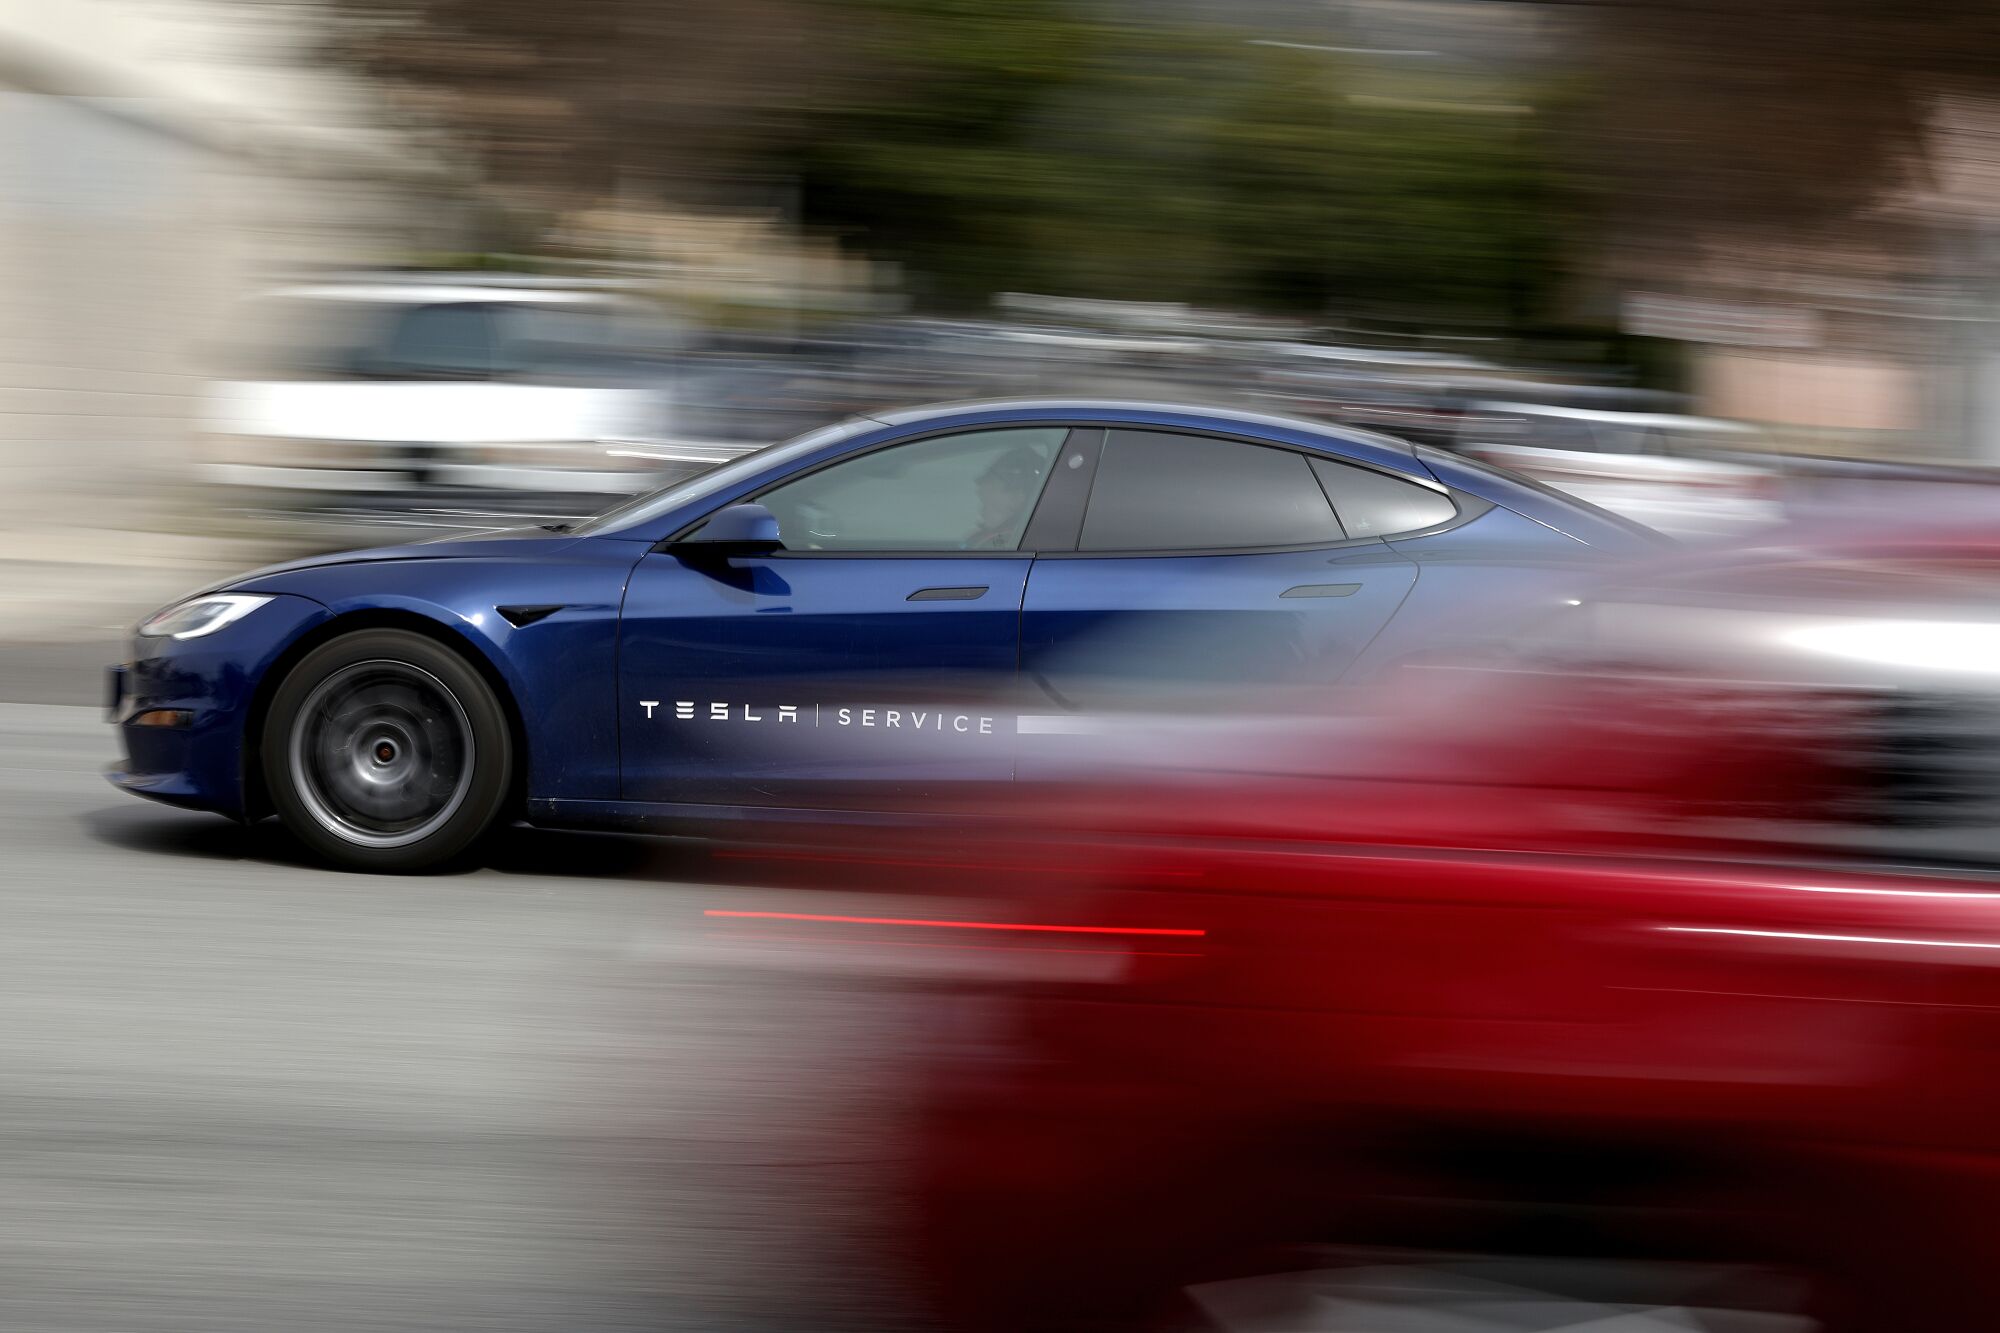 A blue car drives on a street, passing a red car, which is streaked by the panning camera.